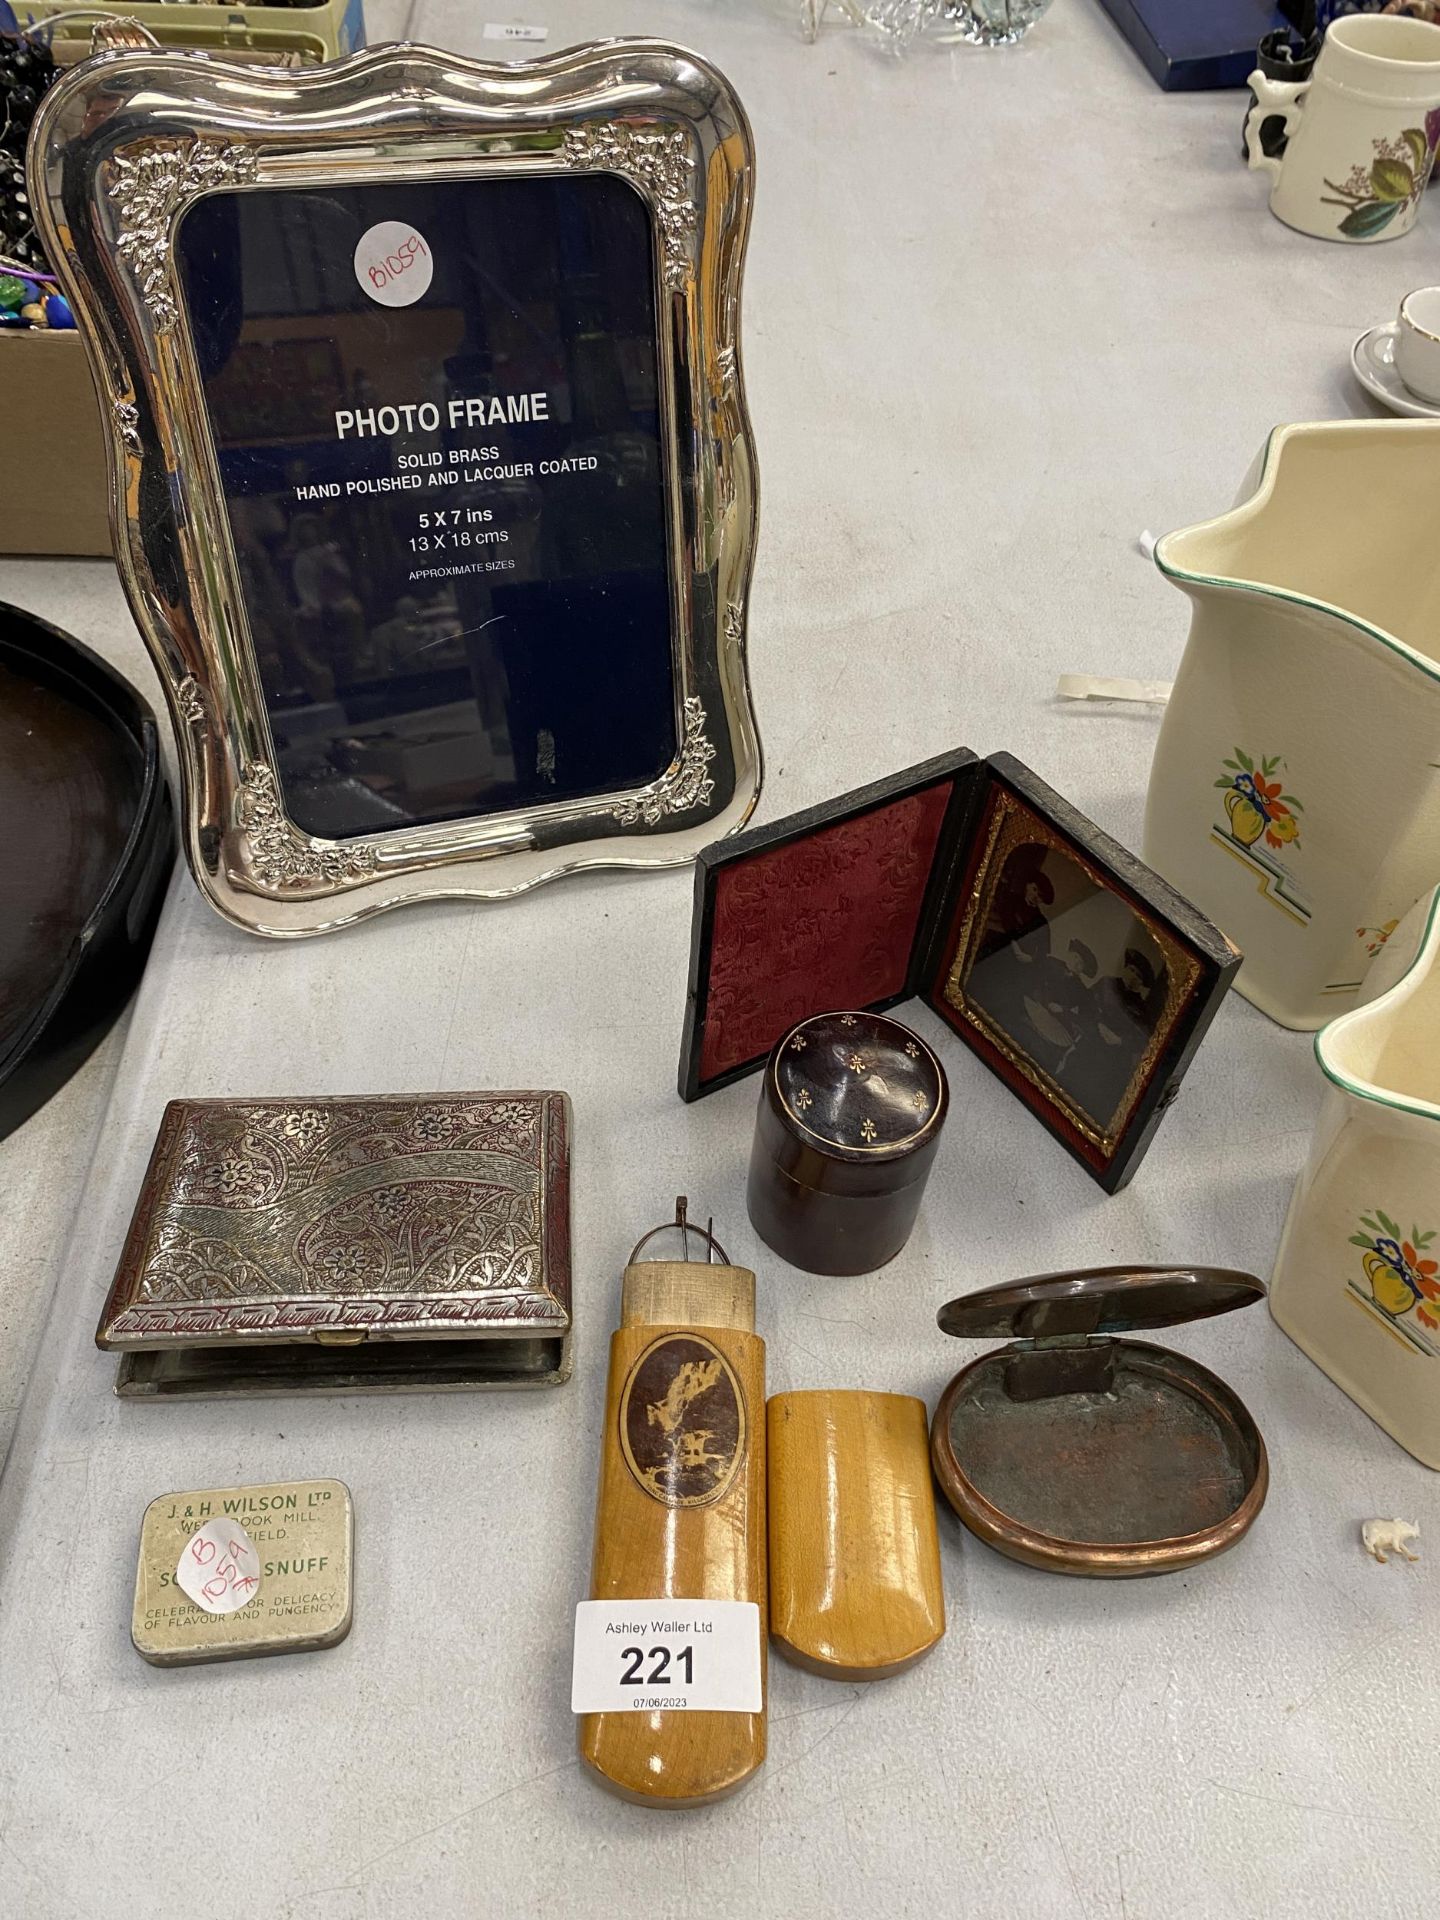 A BRASS HAND POLISHED PHOTO FRAME TOGETHER WITH VARIOUS OTHER ITEMS TO INCLUDE A VINTAGE CIGARETTE